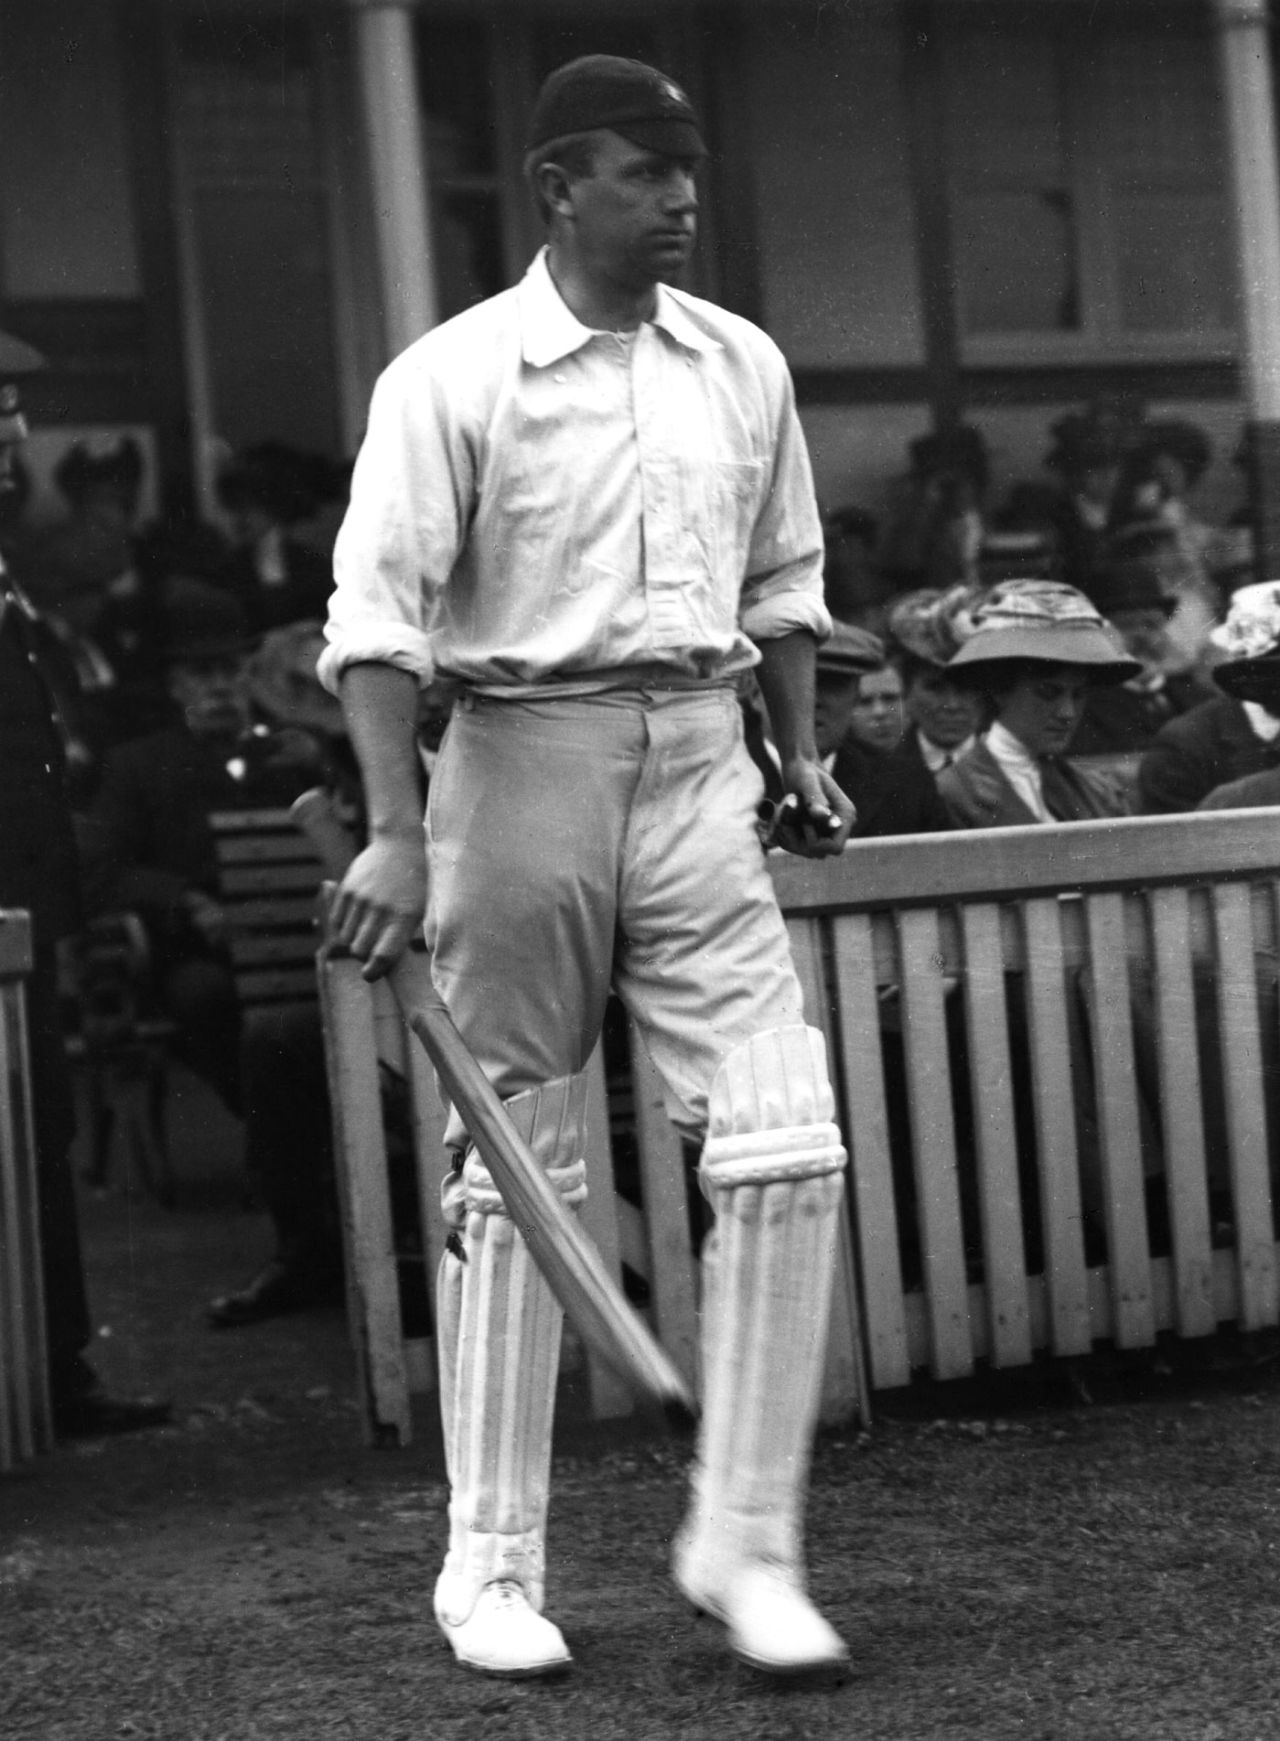 Monty Noble walks out to bat at The Oval, England v Australia, The Oval, August 1909